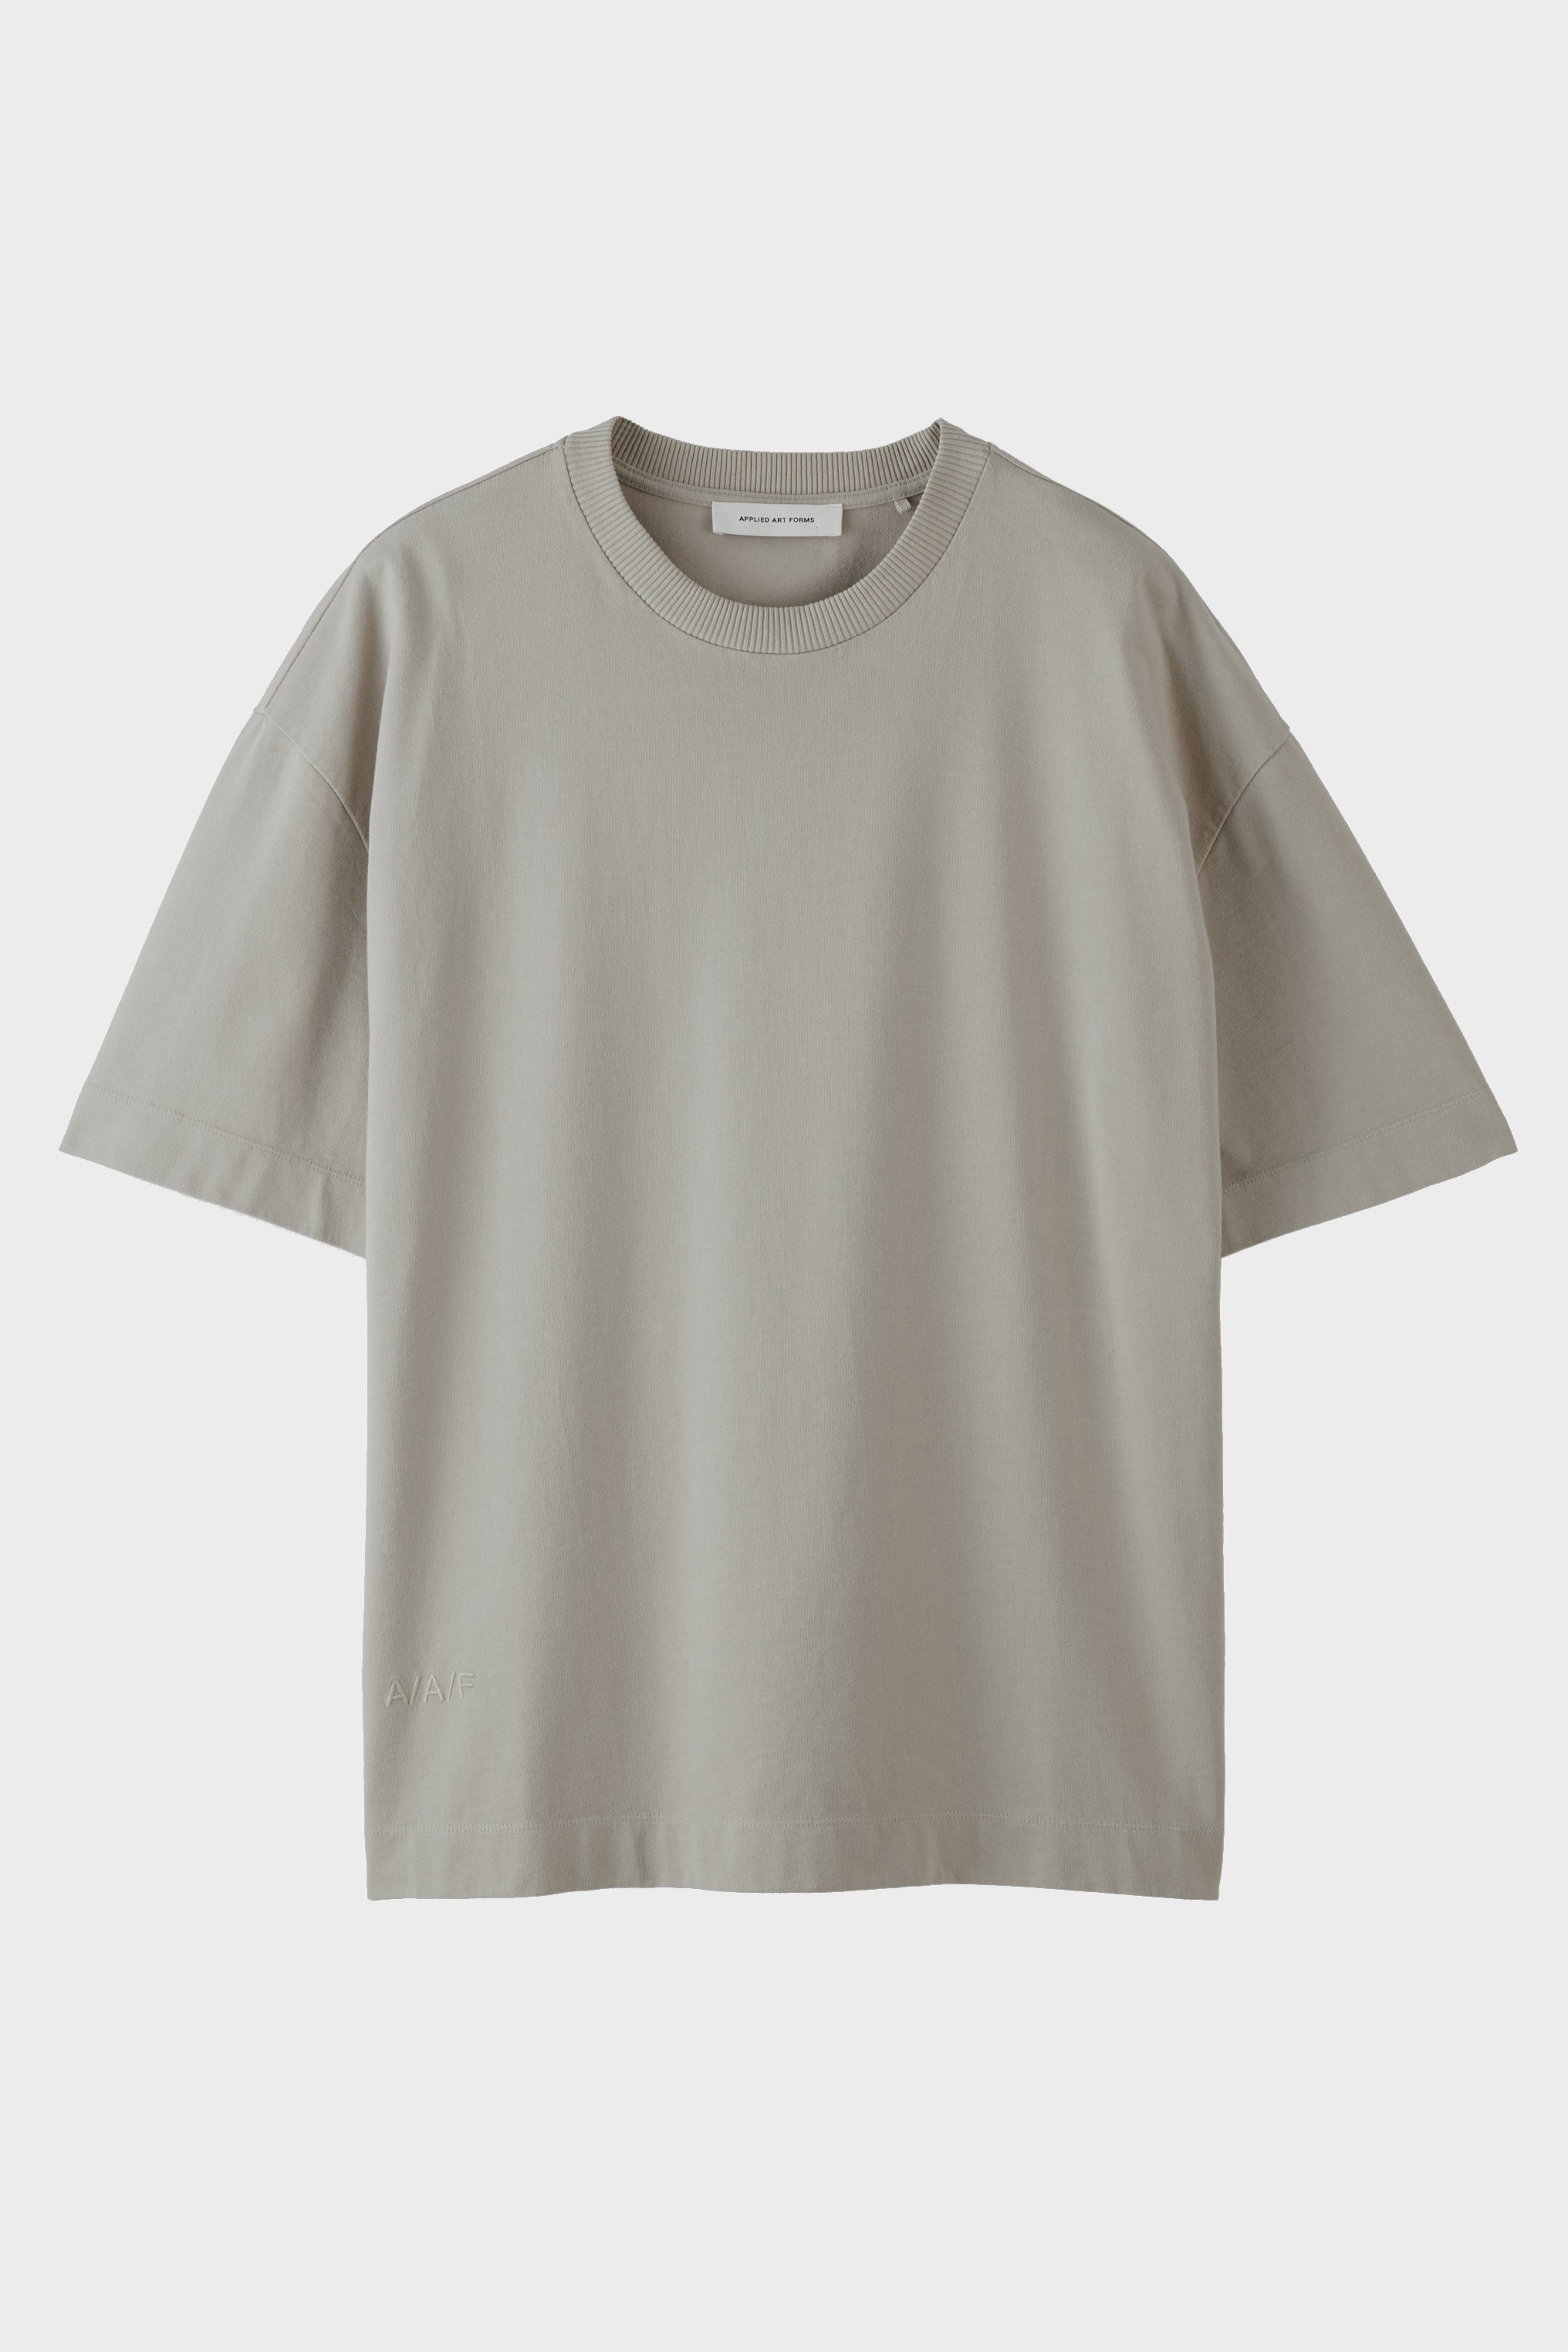 APPLIED ART FORMS Oversize T-Shirt in Ghost Grey XL